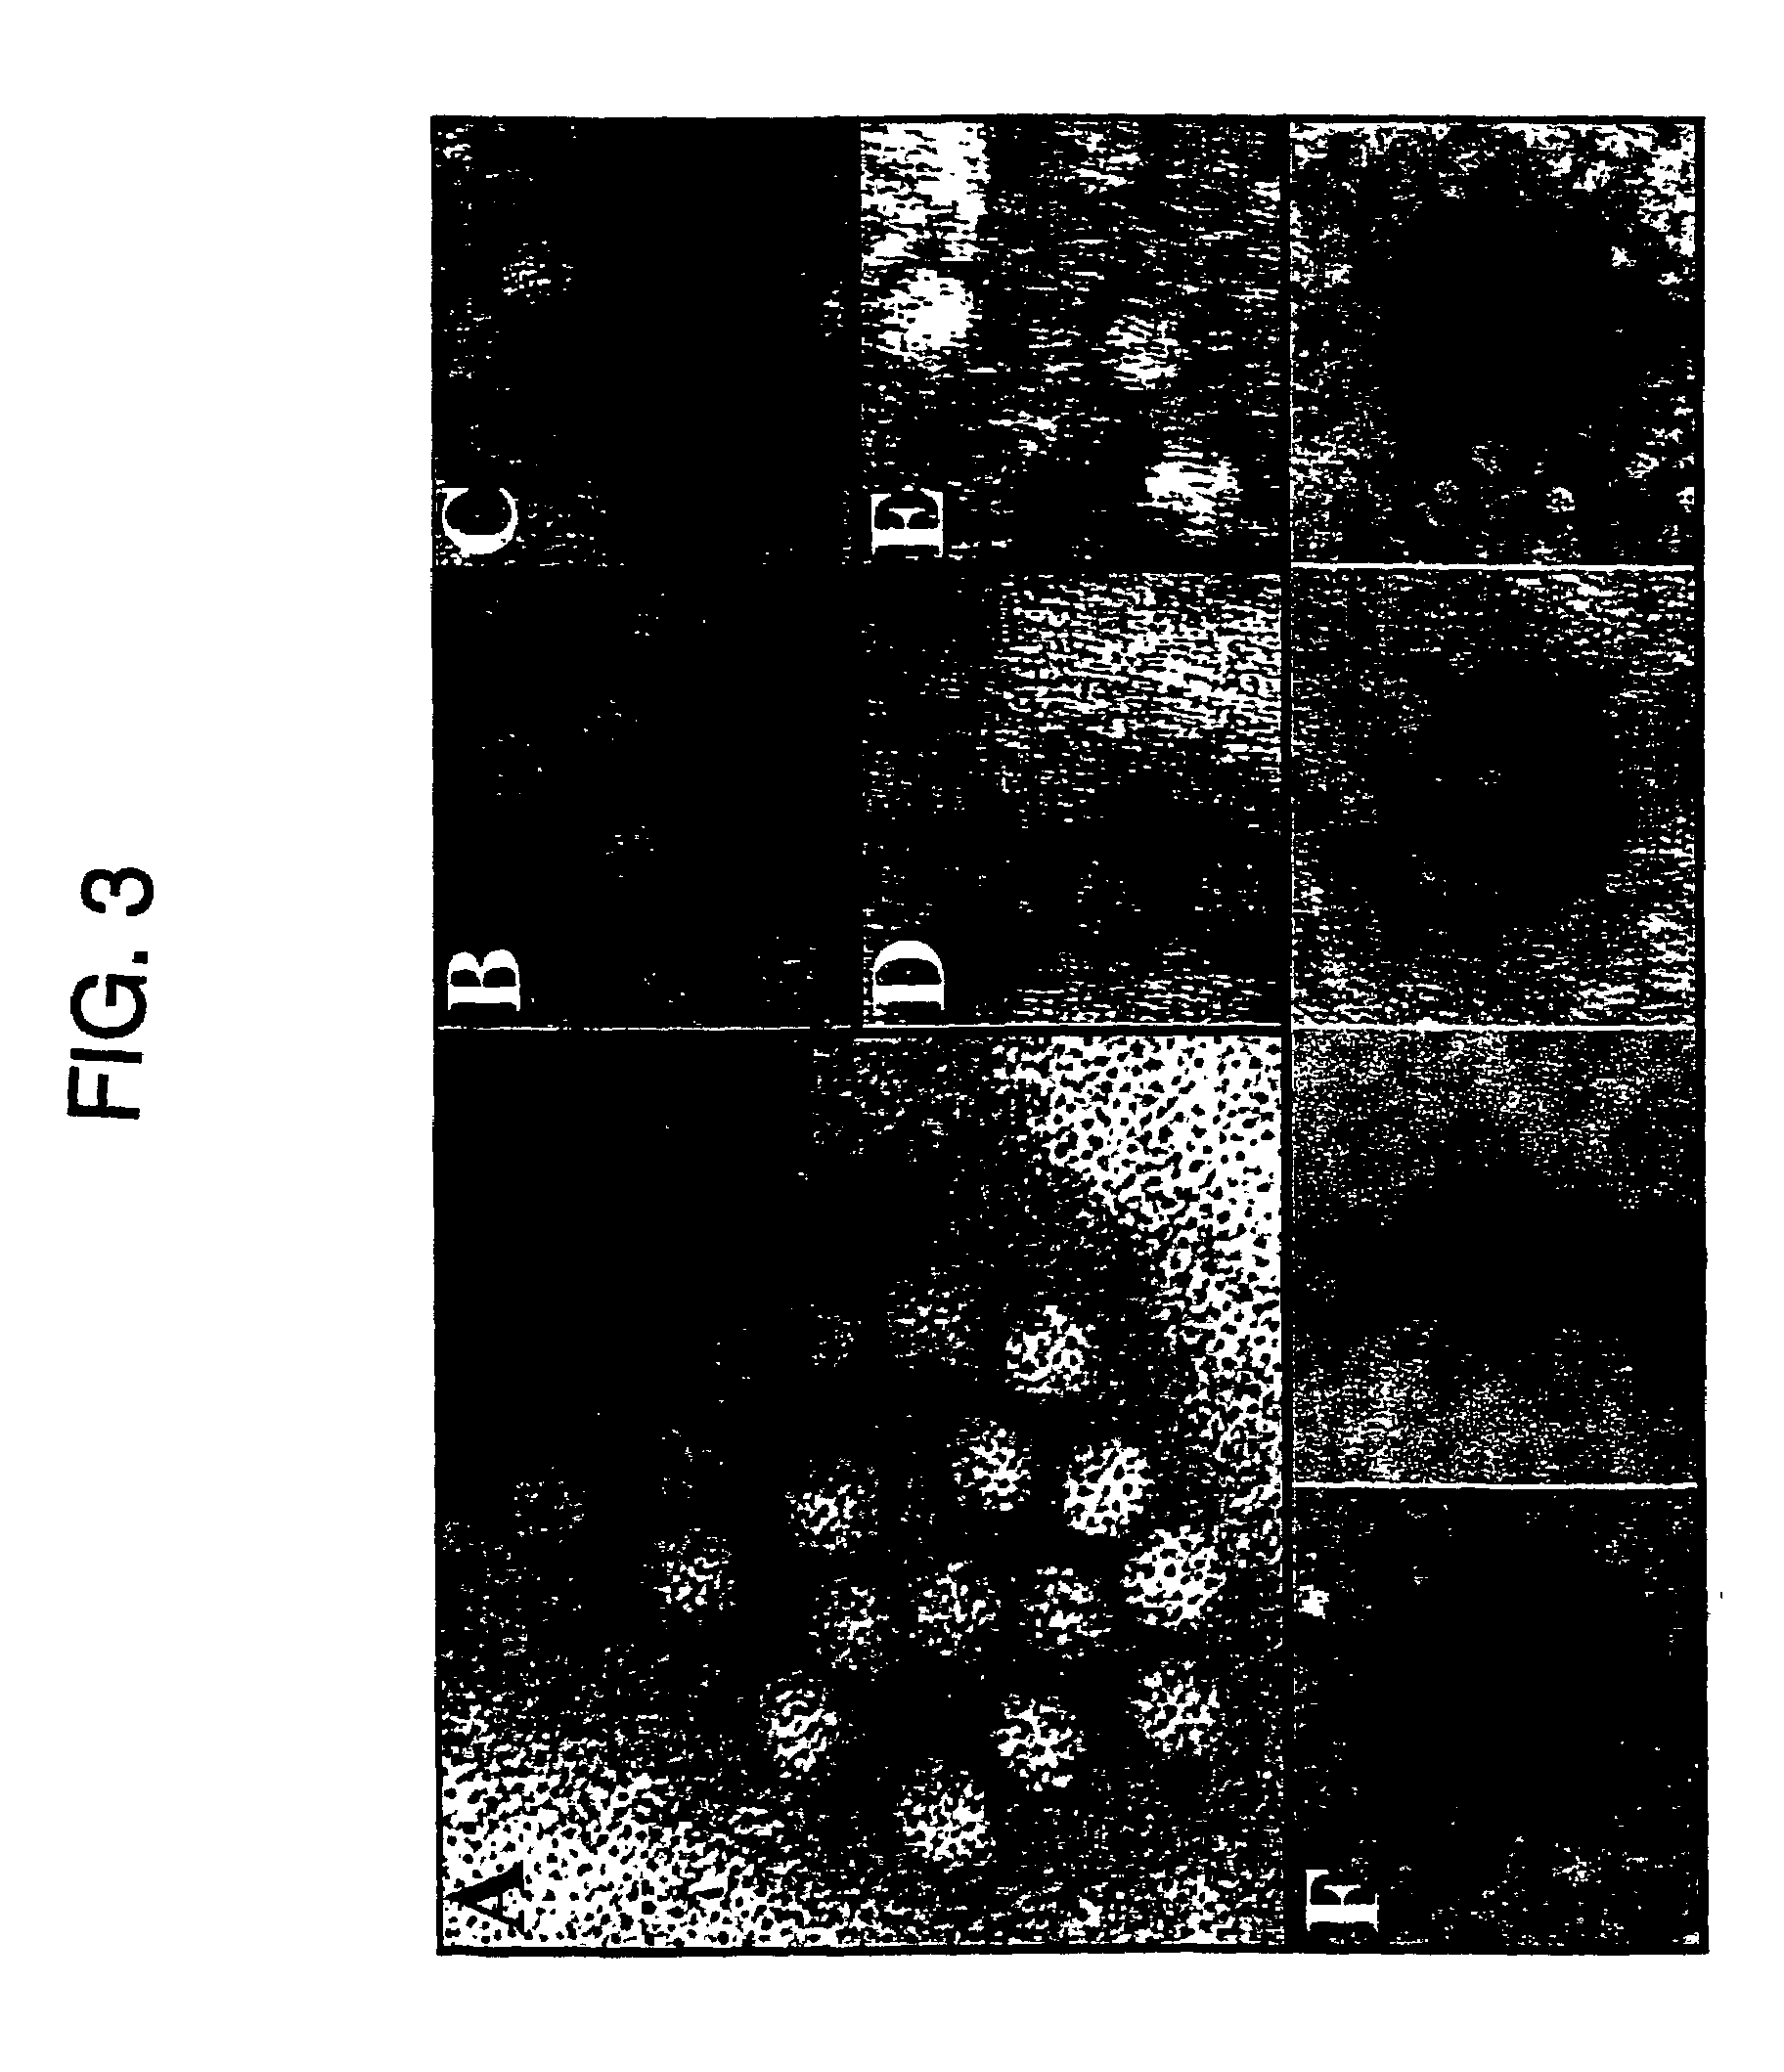 Virus vectors and methods of making and administering the same